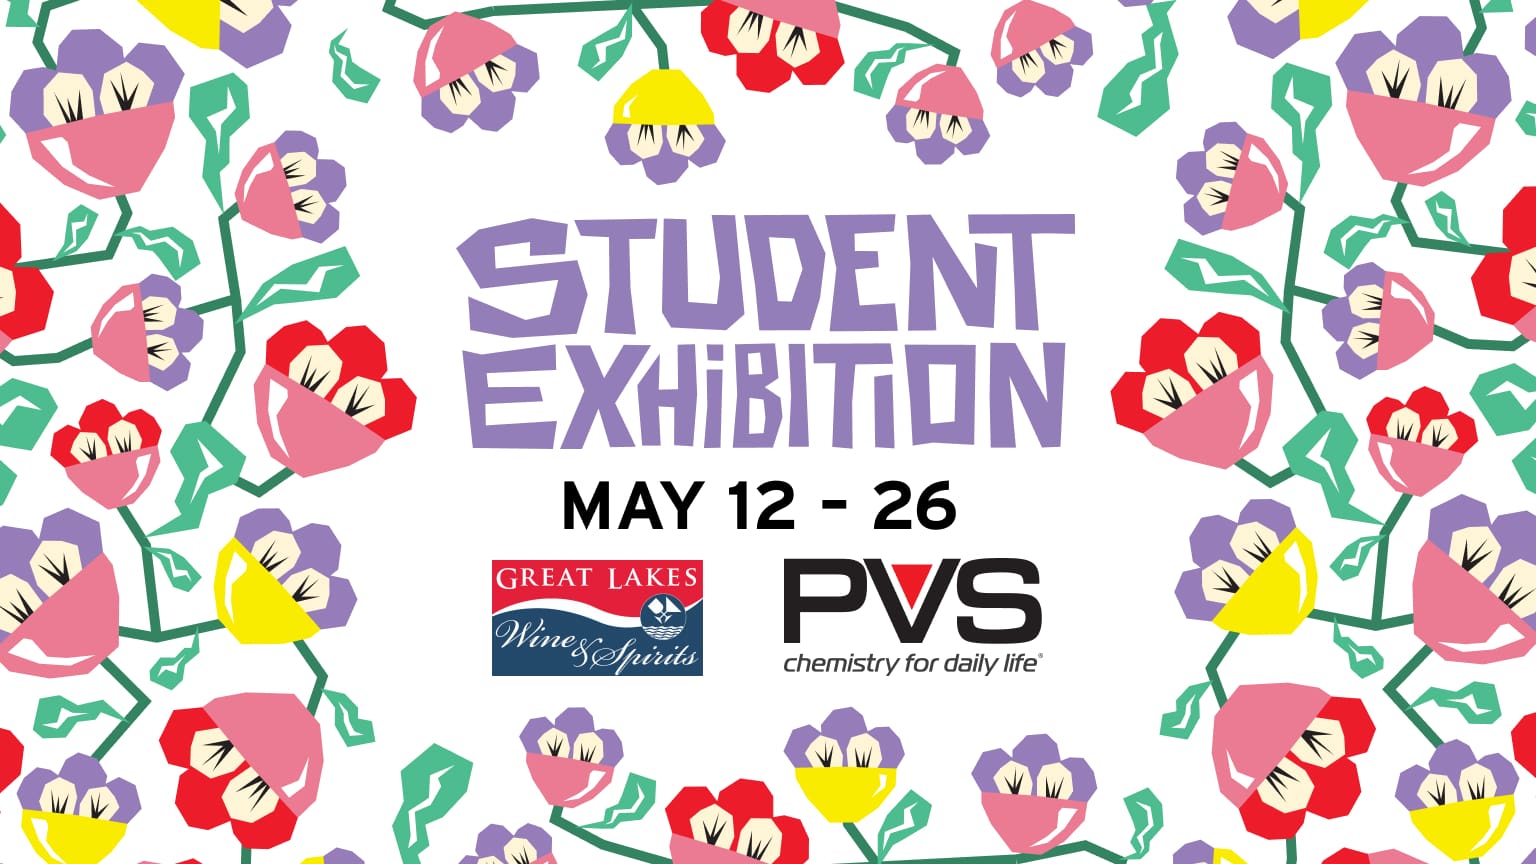 Colorful image adorned with flowers, text says "Student Exhibition May 12, 2023"